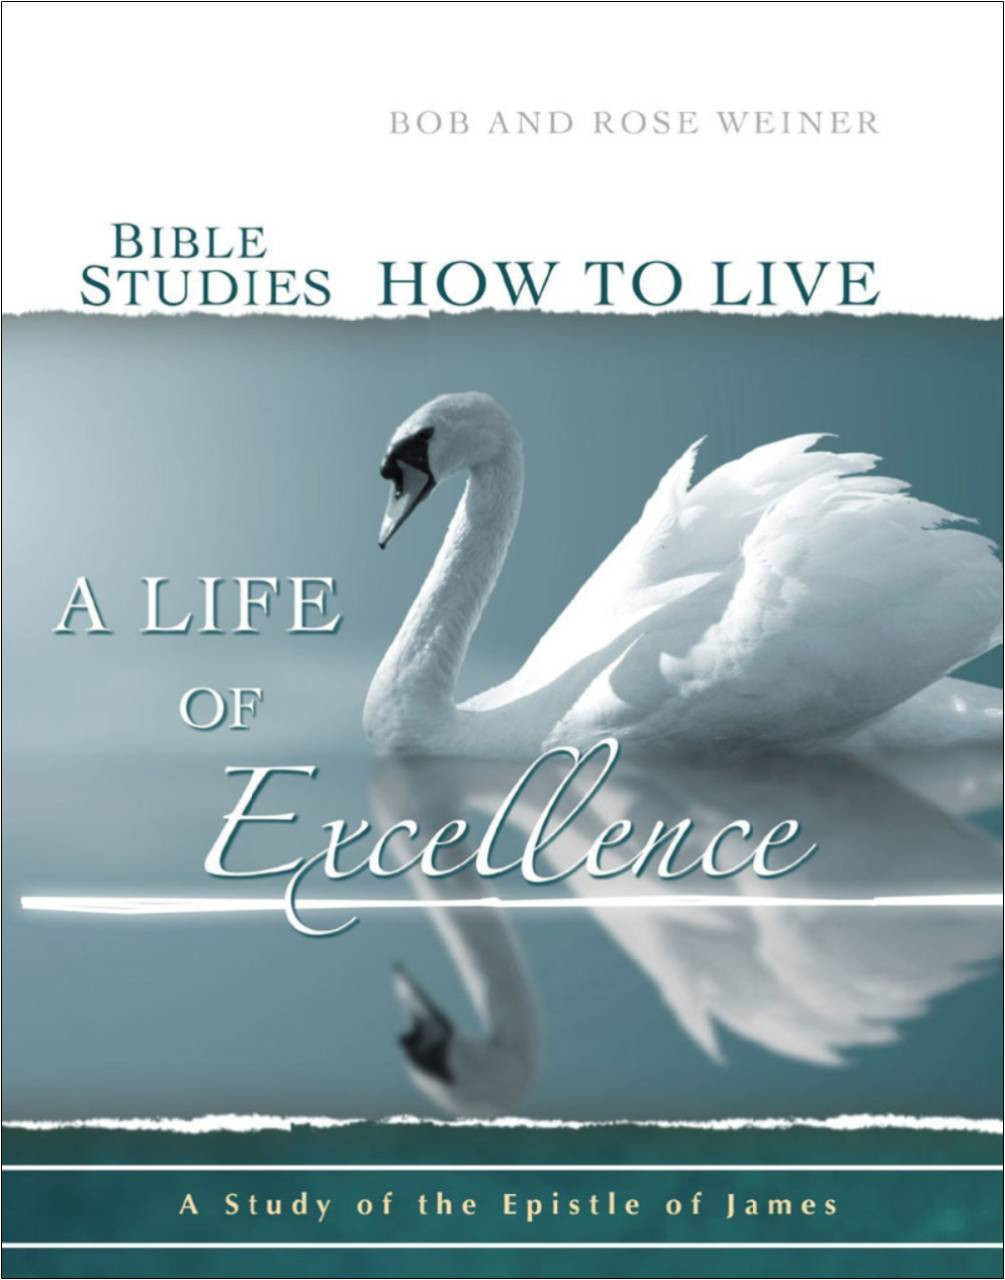 Bible Studies How to Live a Life of Excellence by Bob and Rose Weiner